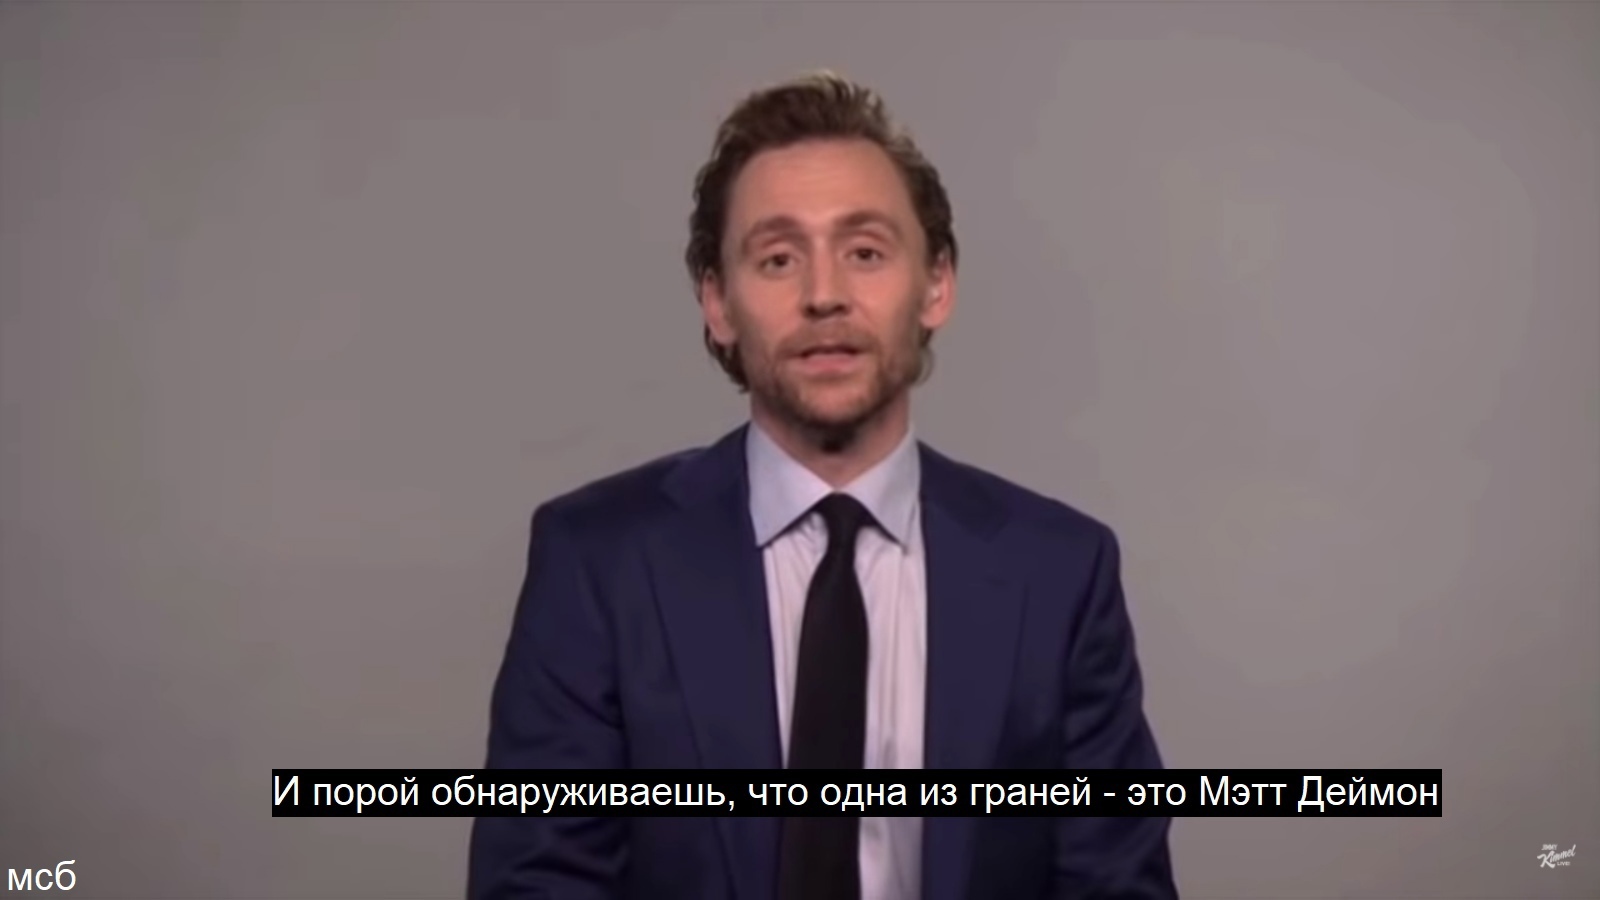 Multifaceted personality - Tom Hiddleston, Matt Damon, Actors and actresses, Celebrities, Storyboard, Loki, Movies, Humor, , Scene from the movie, From the network, Longpost